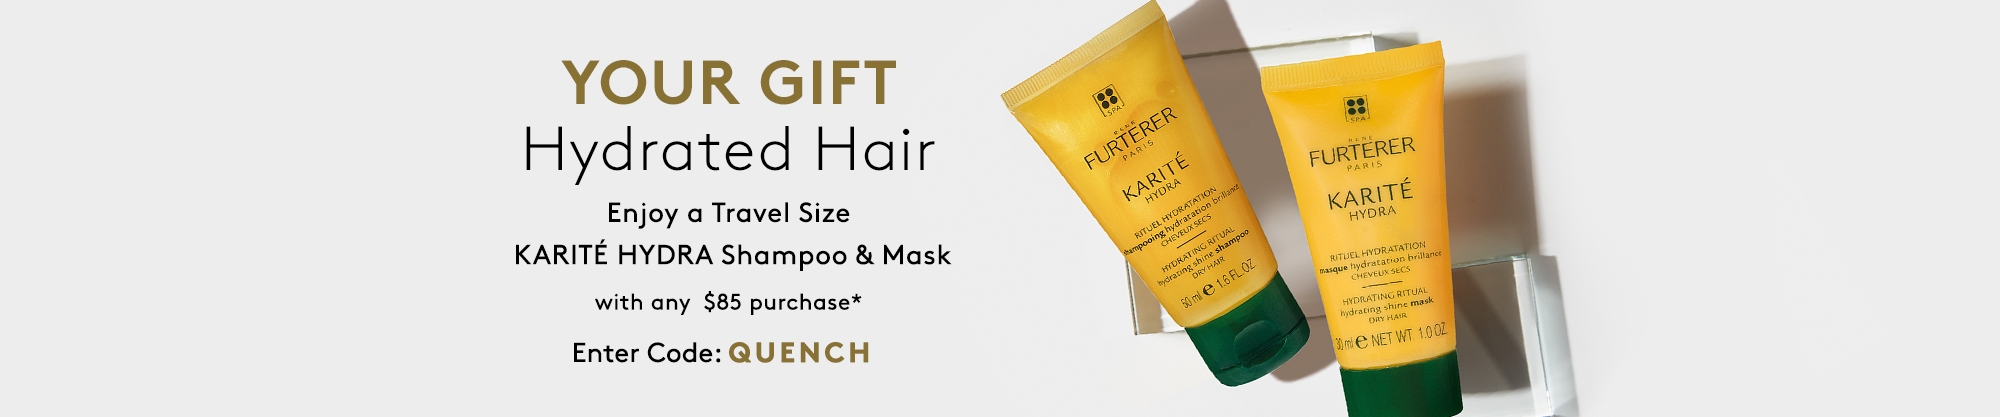 Complimentary Travel Size Hair Mask